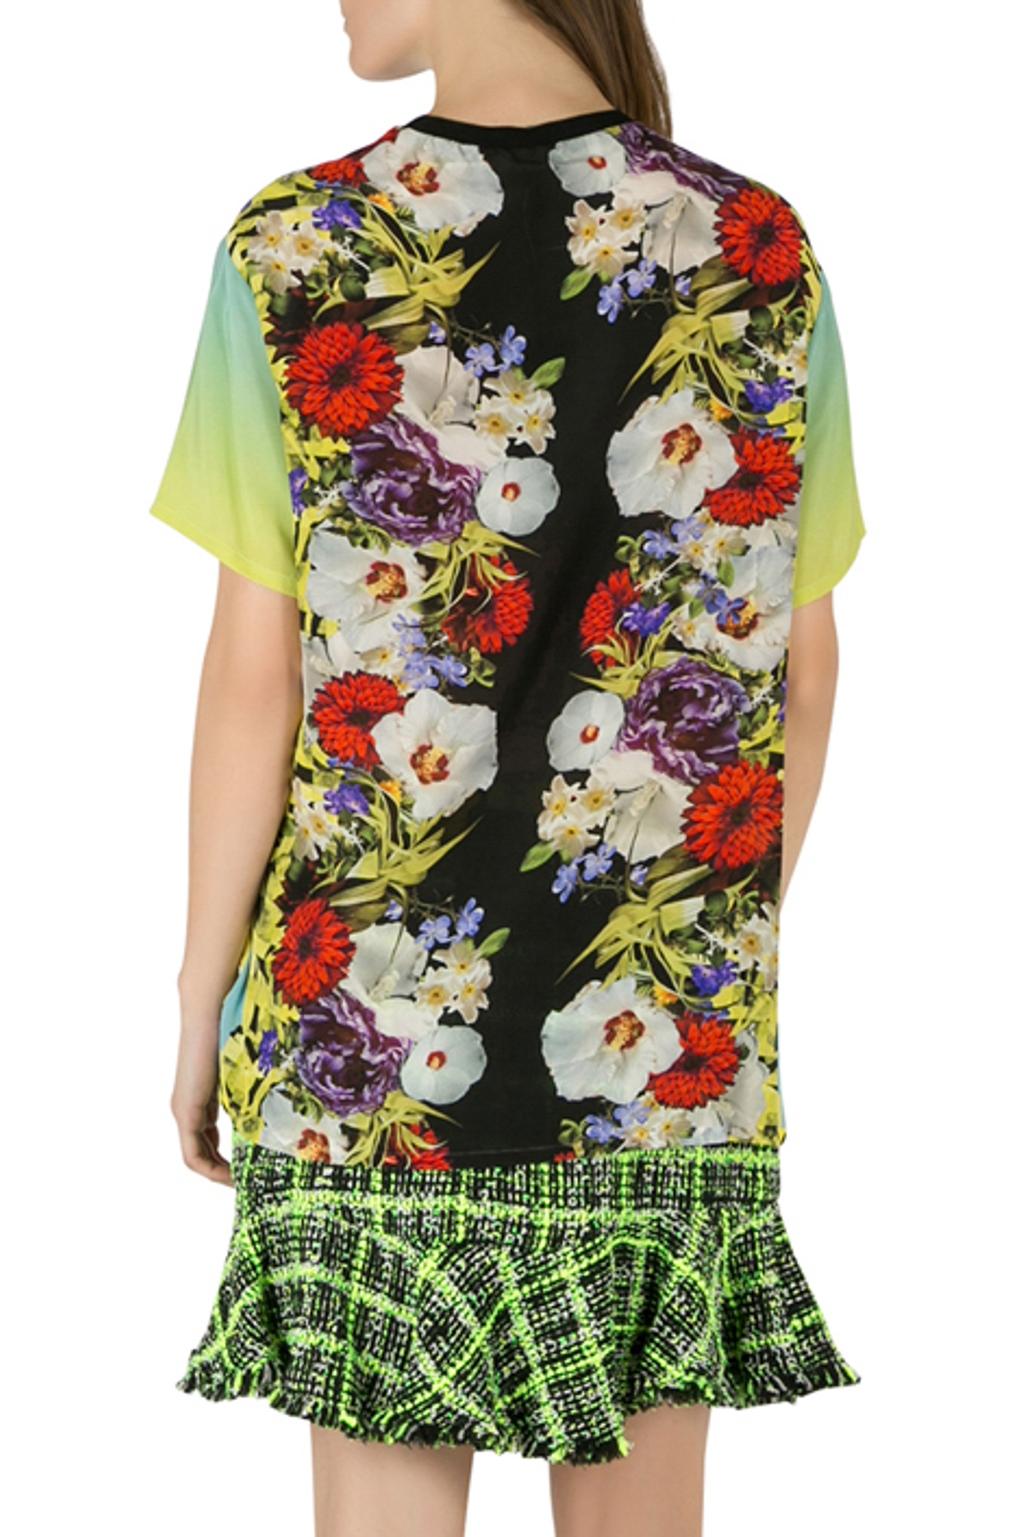 This unique design deserves to be yours. Tailored from silk, the Versace t-shirt is designed in an ombre shade on the sides and sleeves while it features a floral print on the front and back. This multicolor creation comes with a crew neckline and a